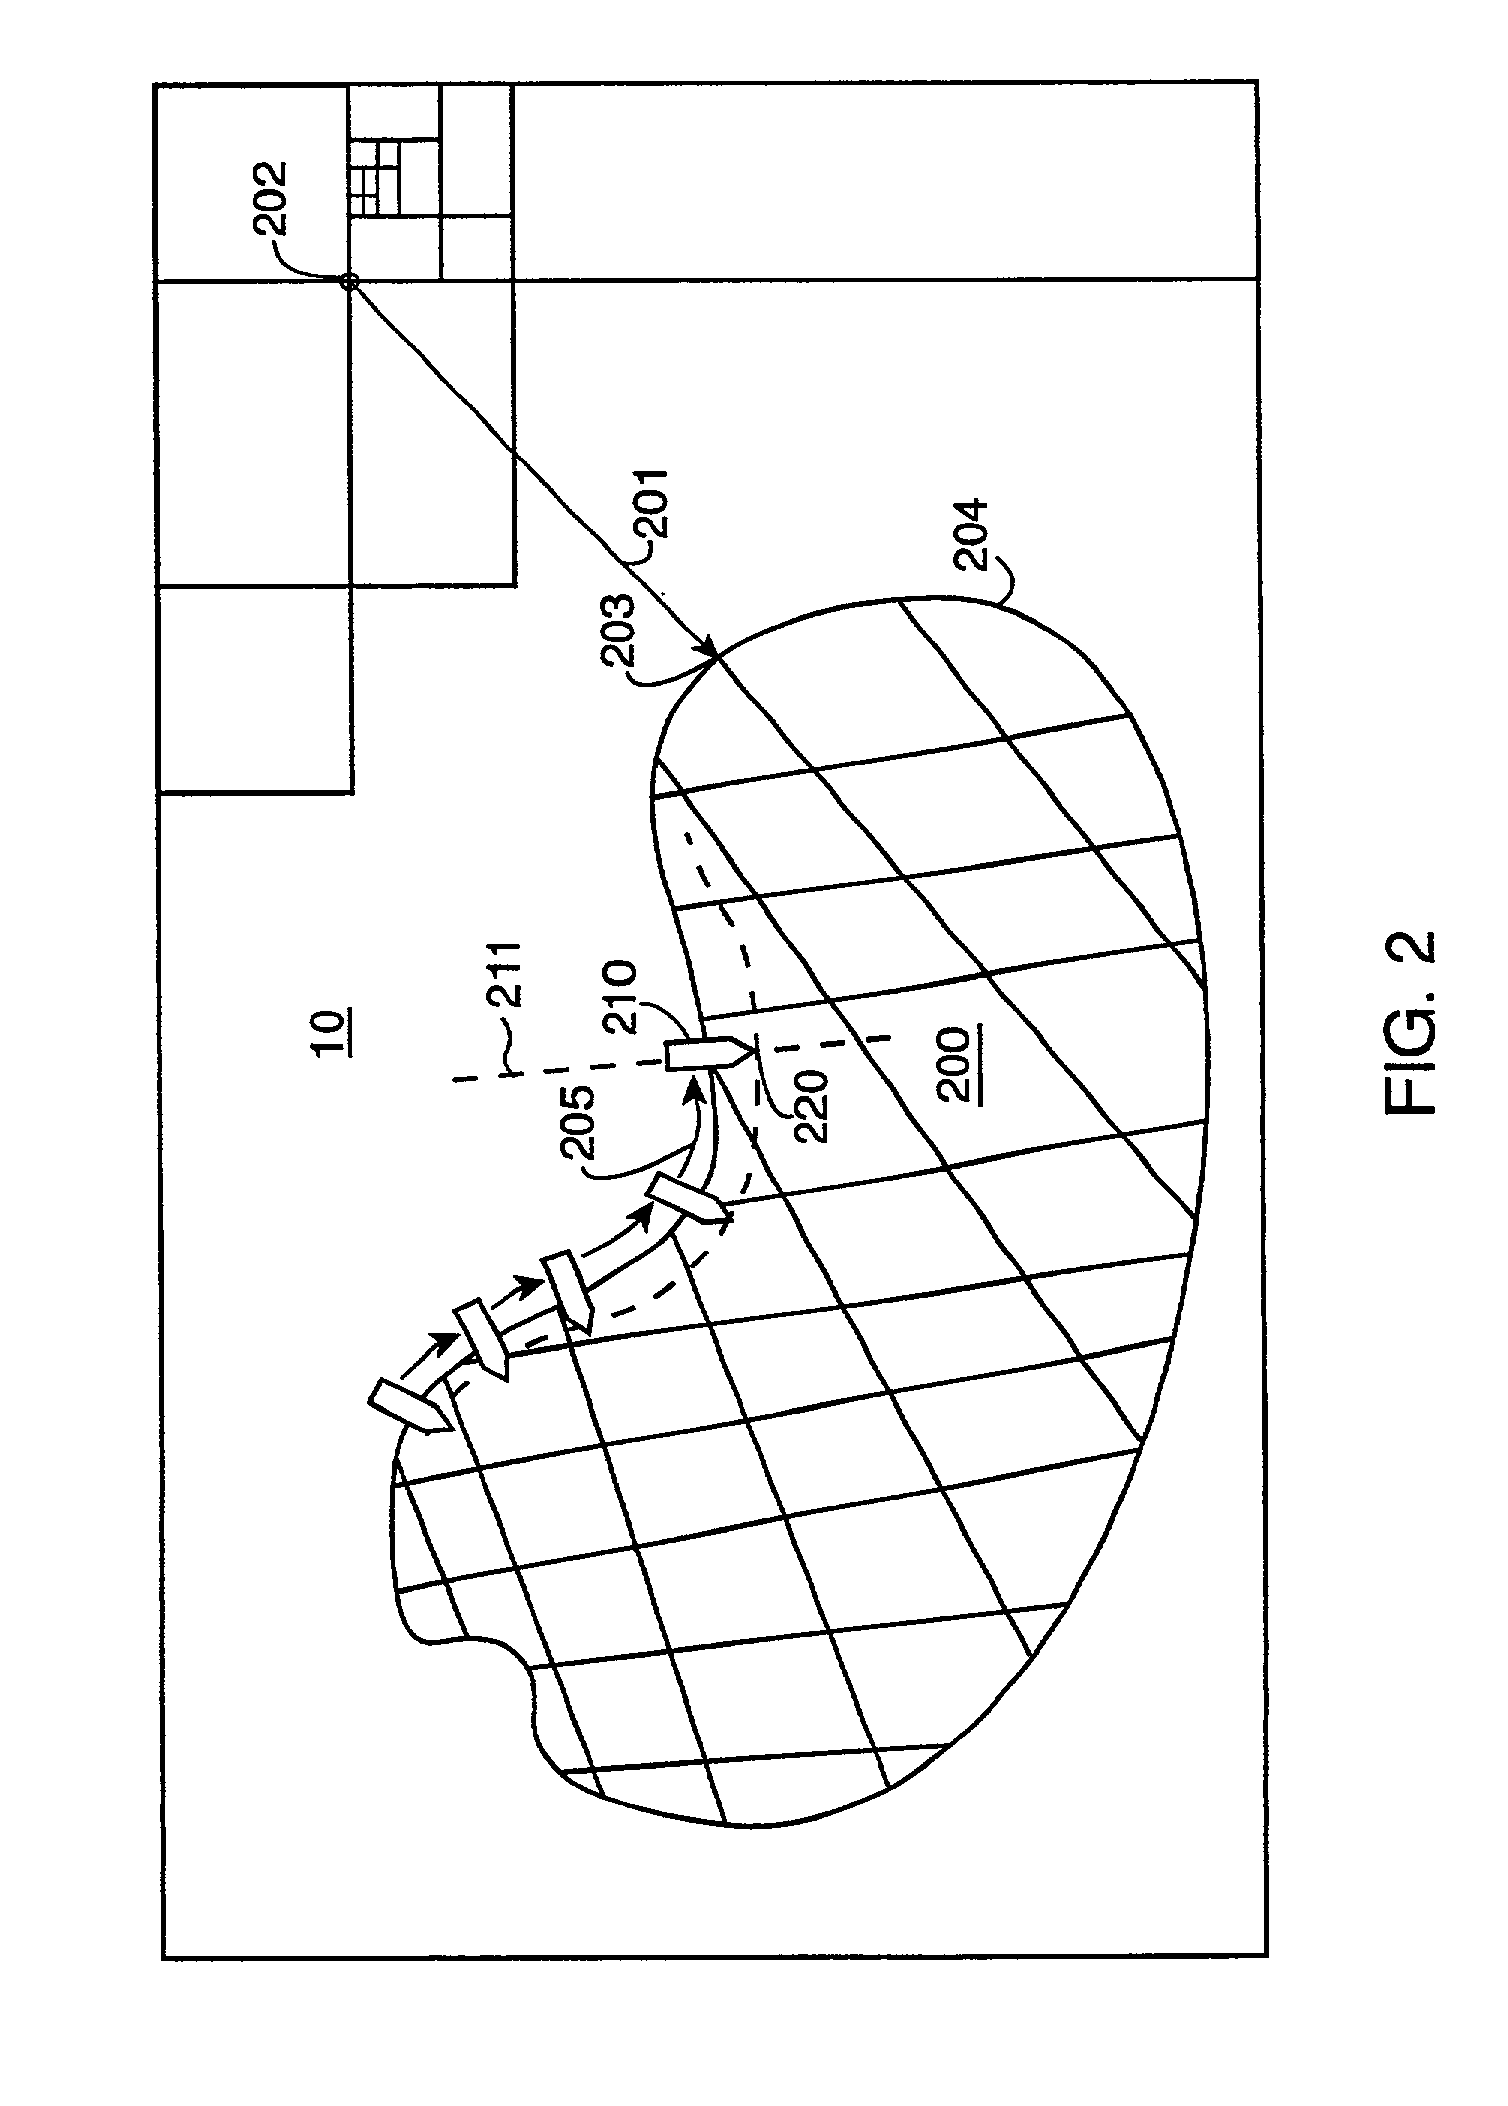 System and method for converting range data to 3D models